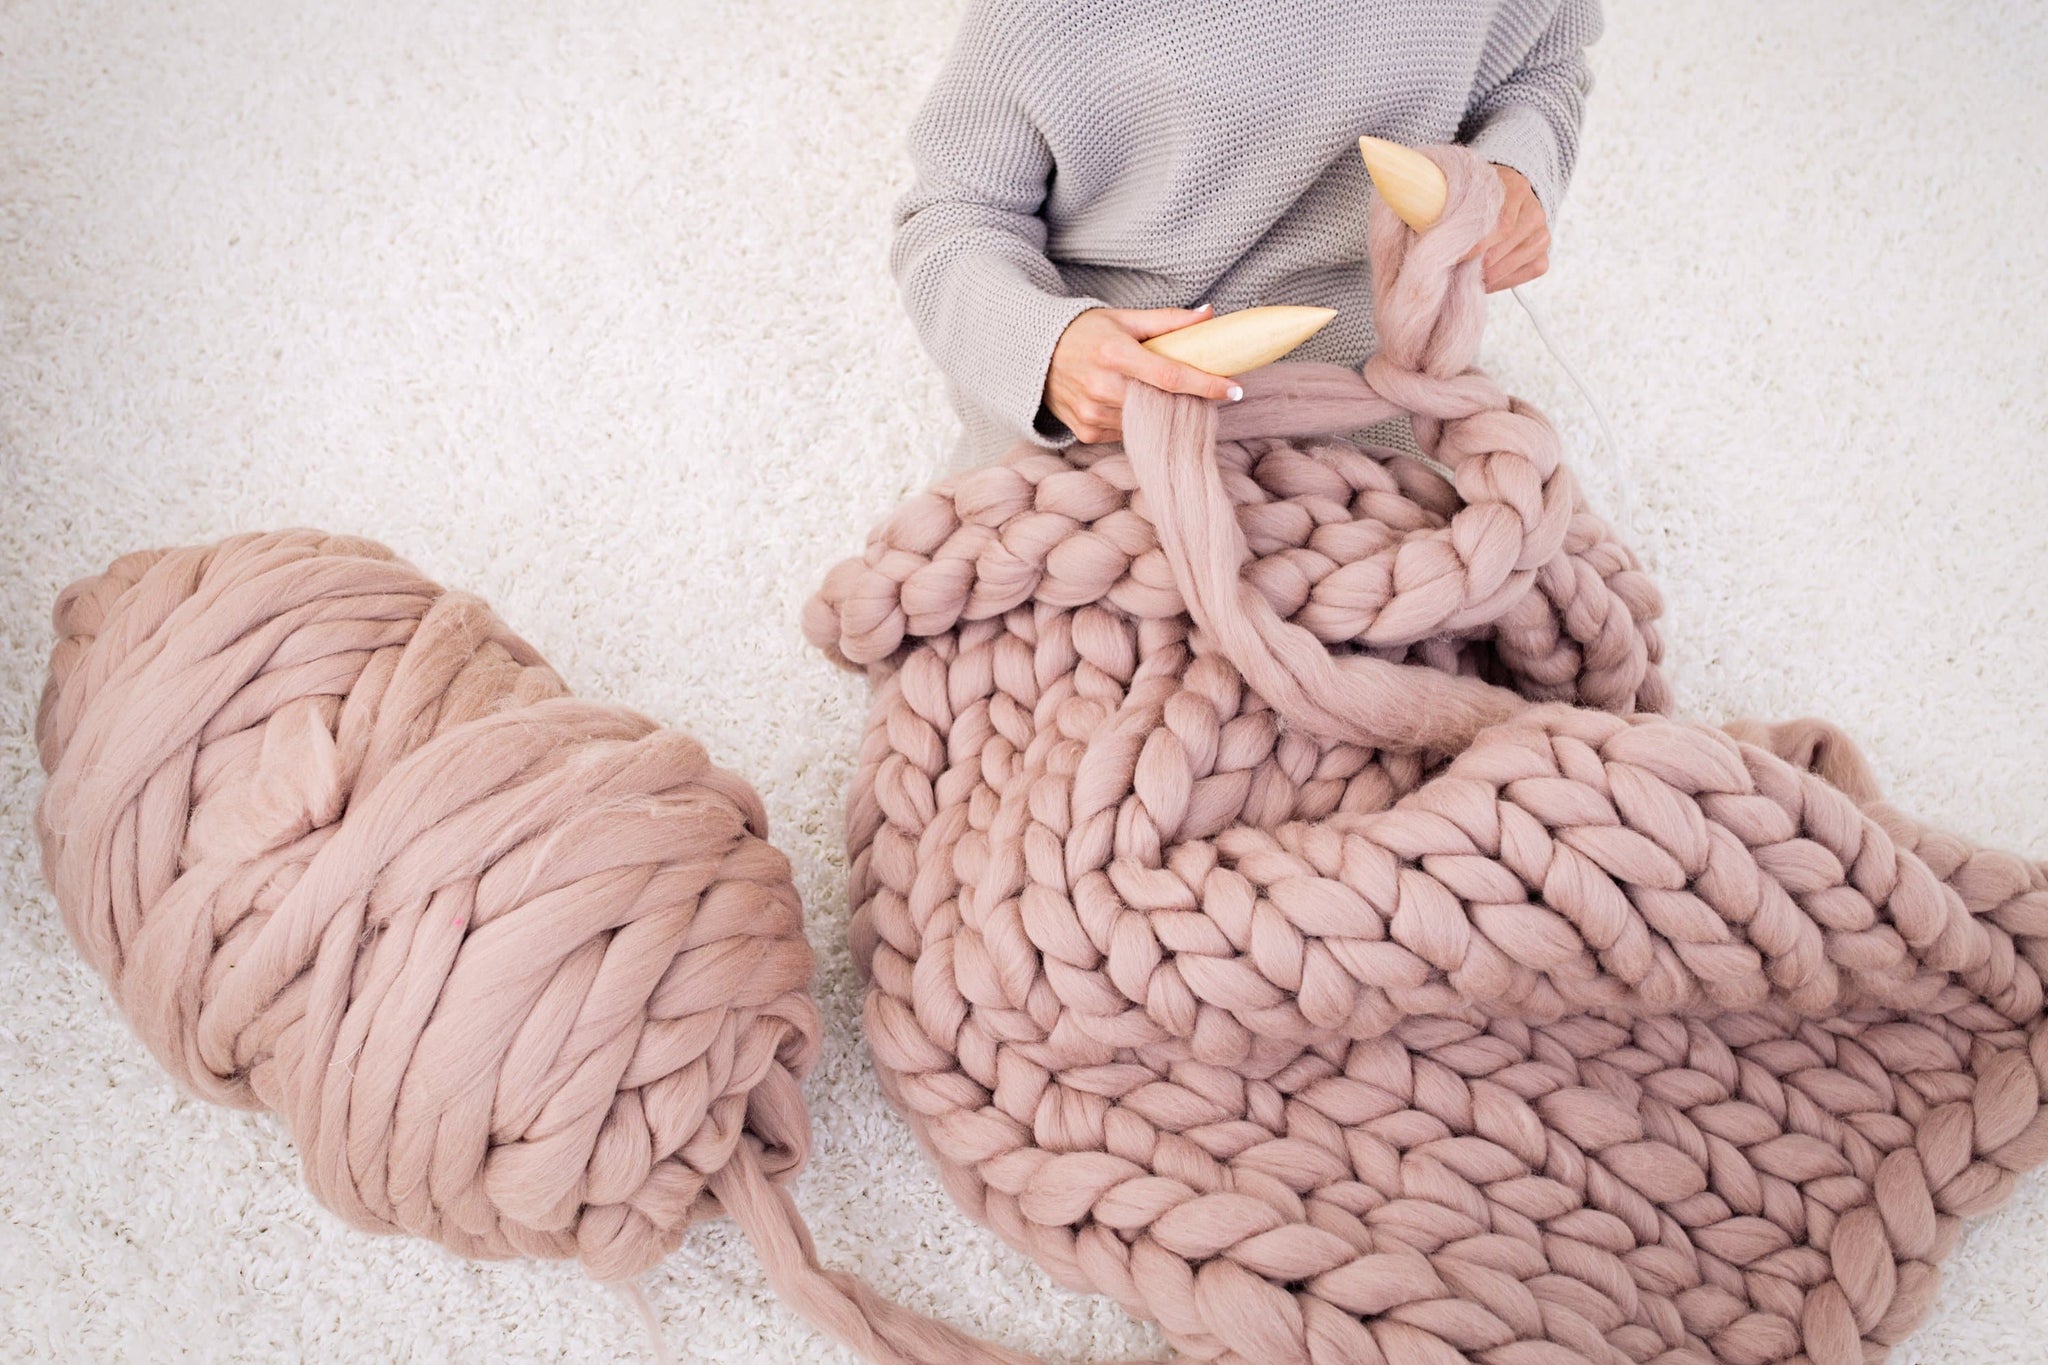 Knitting bags made of giant yarn without knitting needles